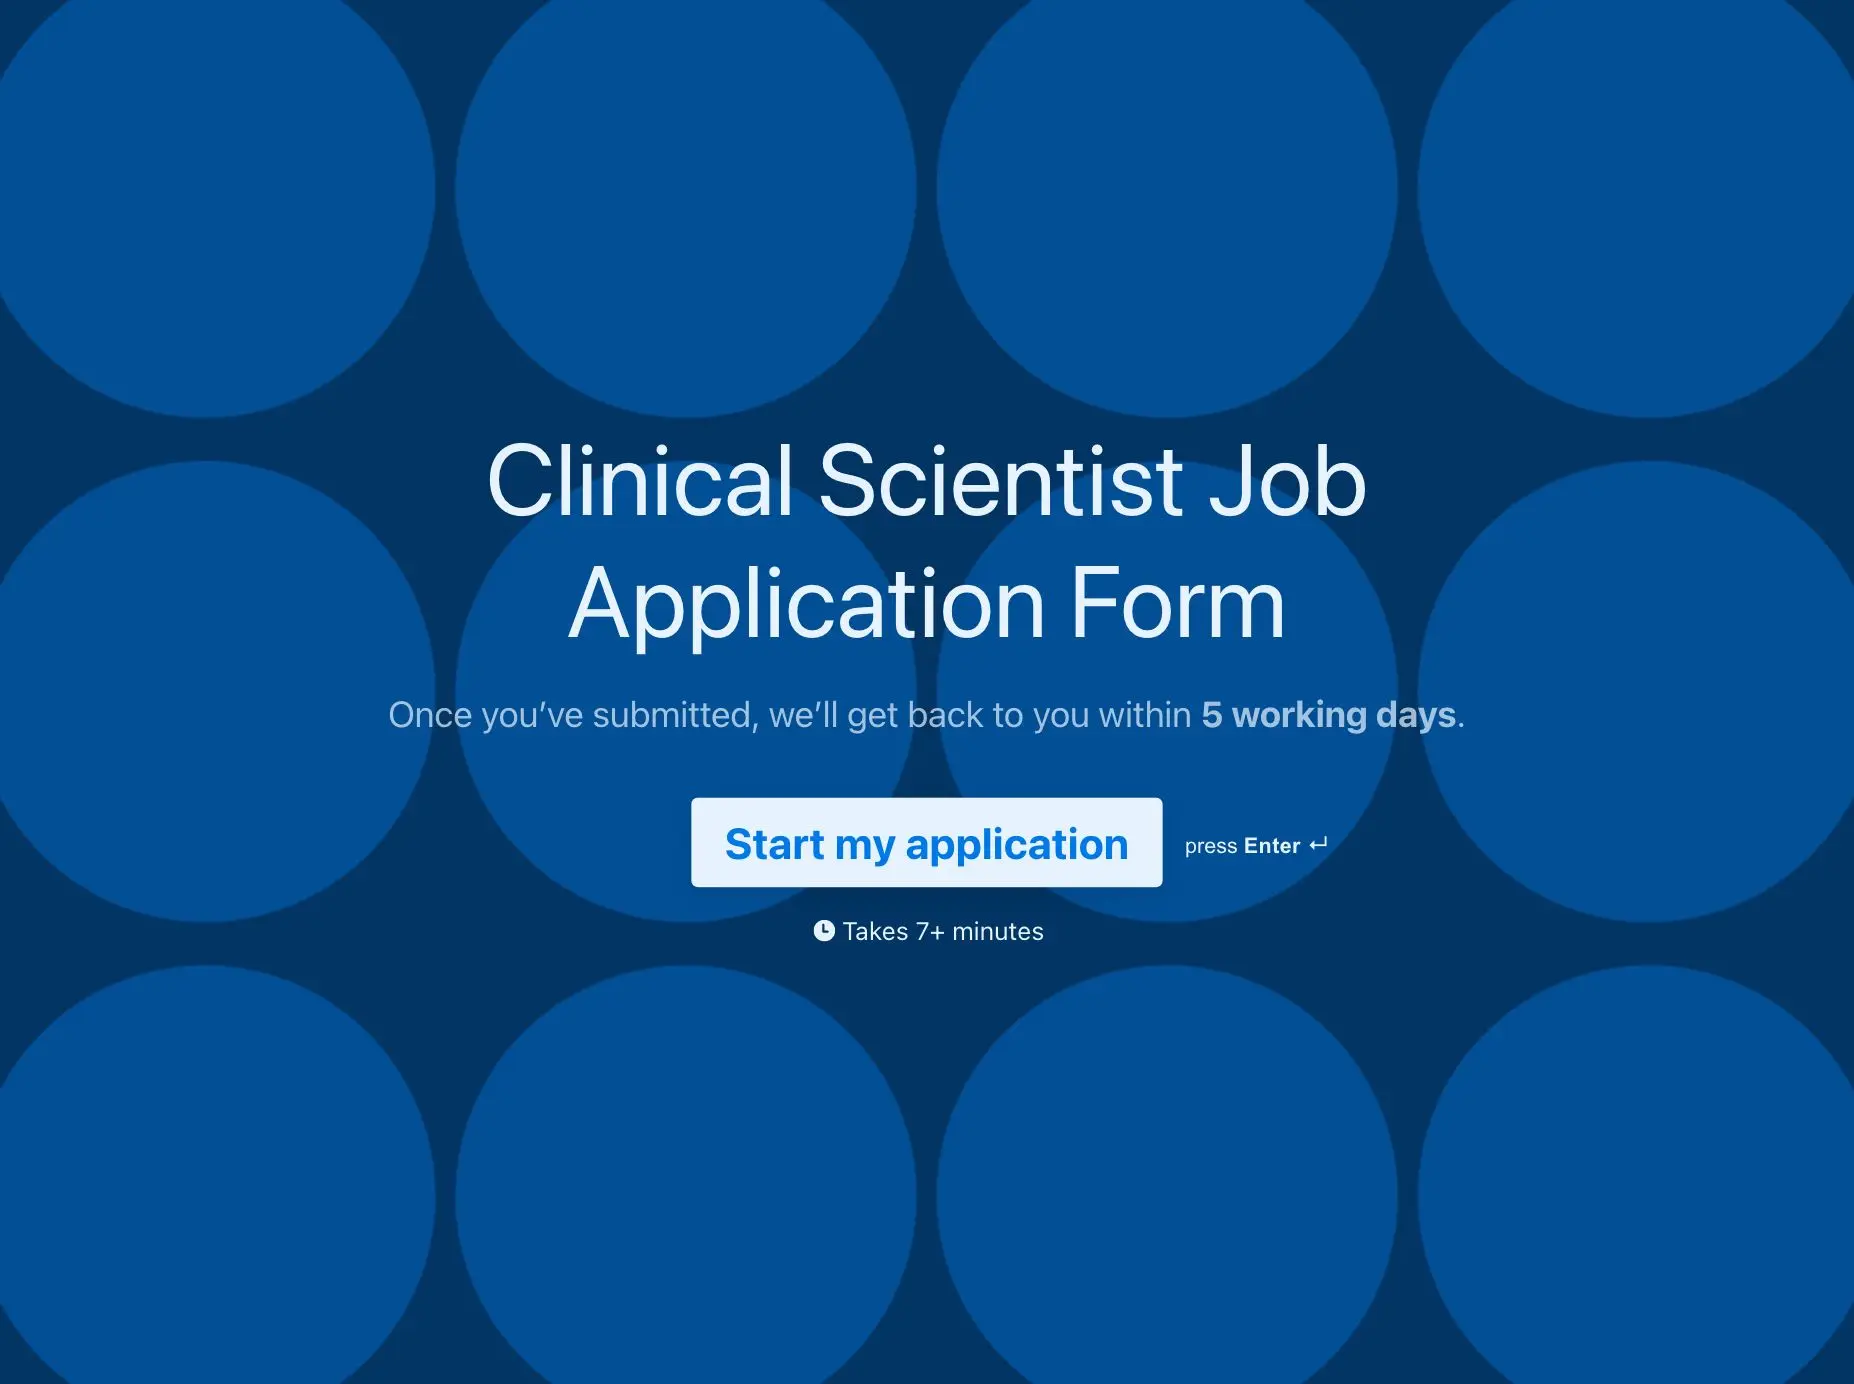 Clinical Scientist Job Application Form Template Hero